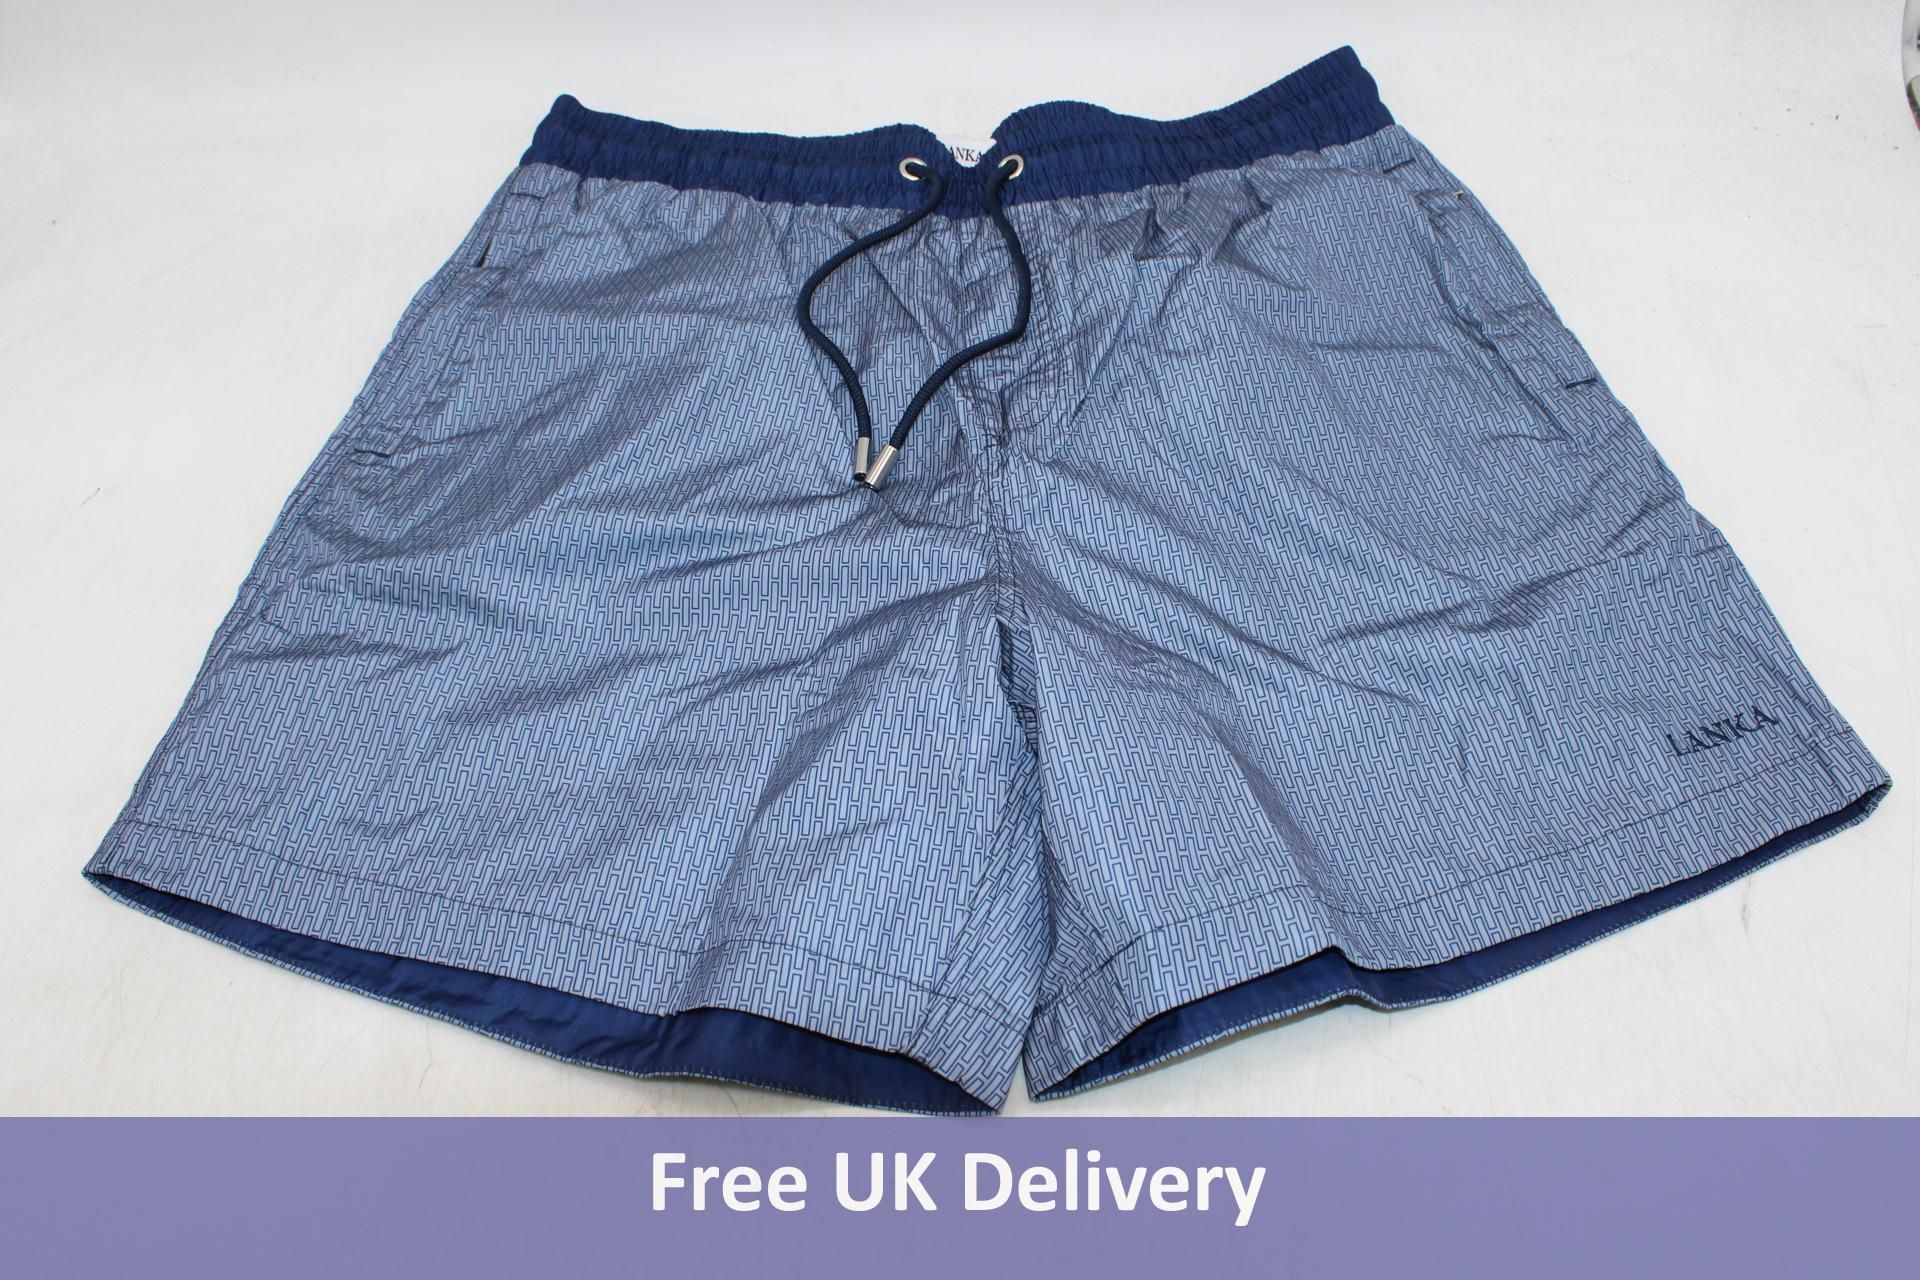 Two Pairs of Lanka Swim Shorts, Inner Mesh Lining, Twin Button Pockets, Steel Blue, Small